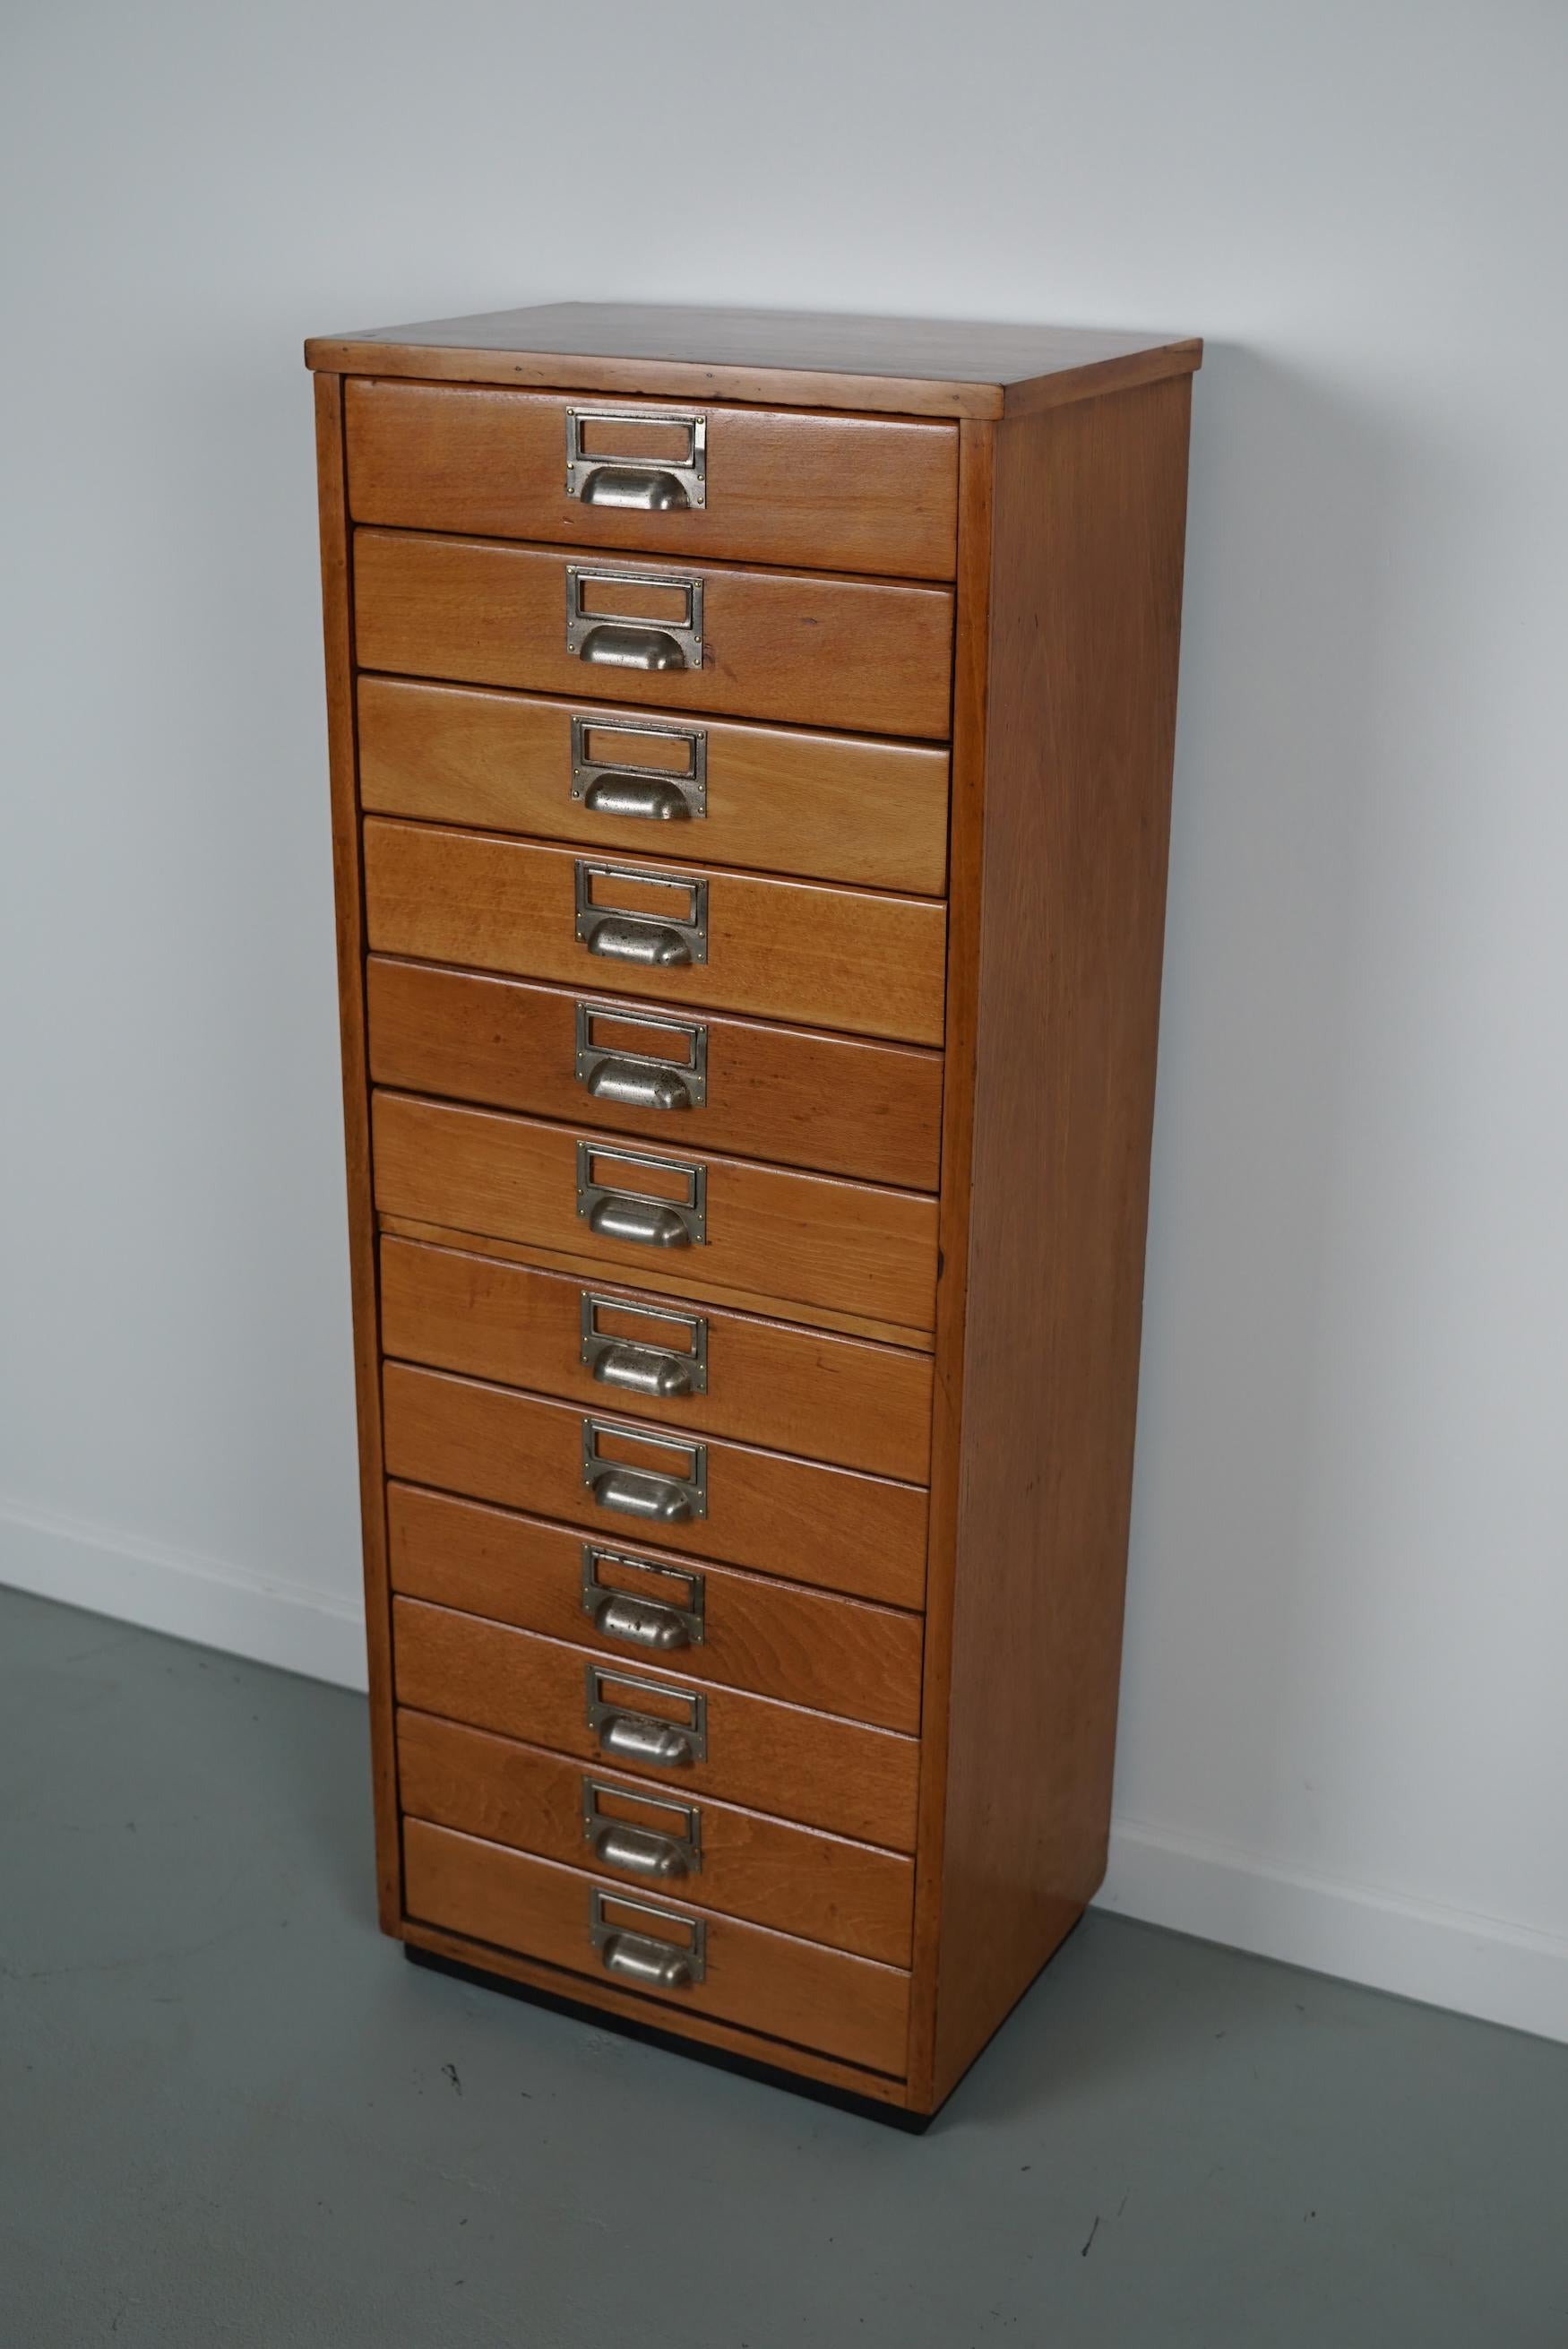 This Dutch apothecary cabinet was made circa 1950s in the Netherlands. It features 12 drawers with metal cup handles. It is made from beech wood. The interior dimensions of the drawers are D x W x H: 22 x 33 x 6 cm.